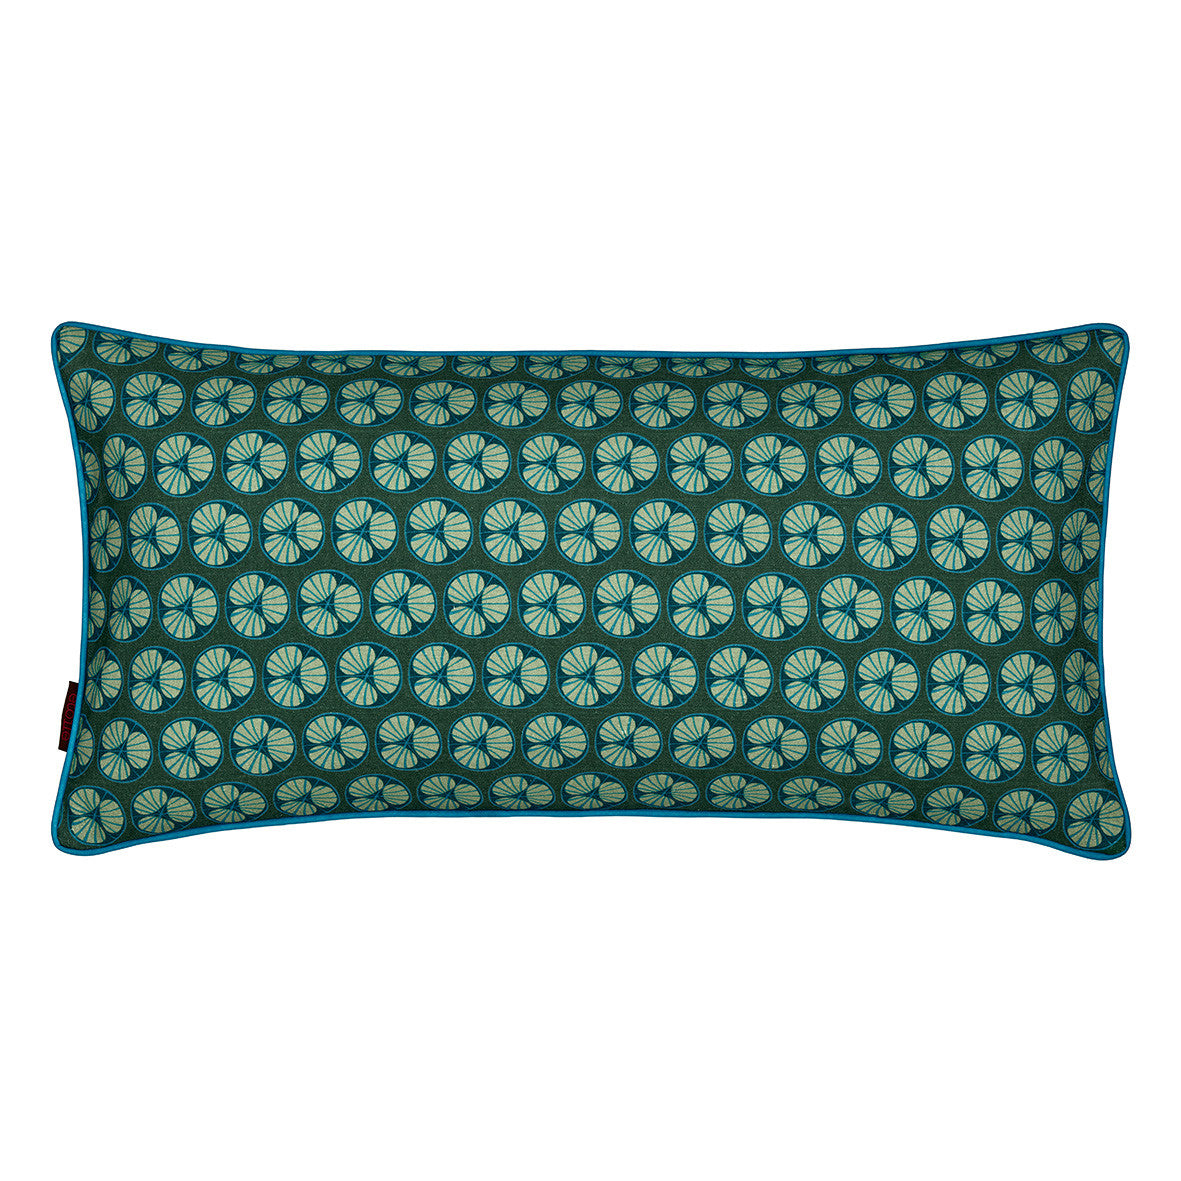 Graphic Fruit Cross Section Pattern Linen Union Printed Decorative Throw Pillow in Dark Moss Green 12x24" 30x60cm